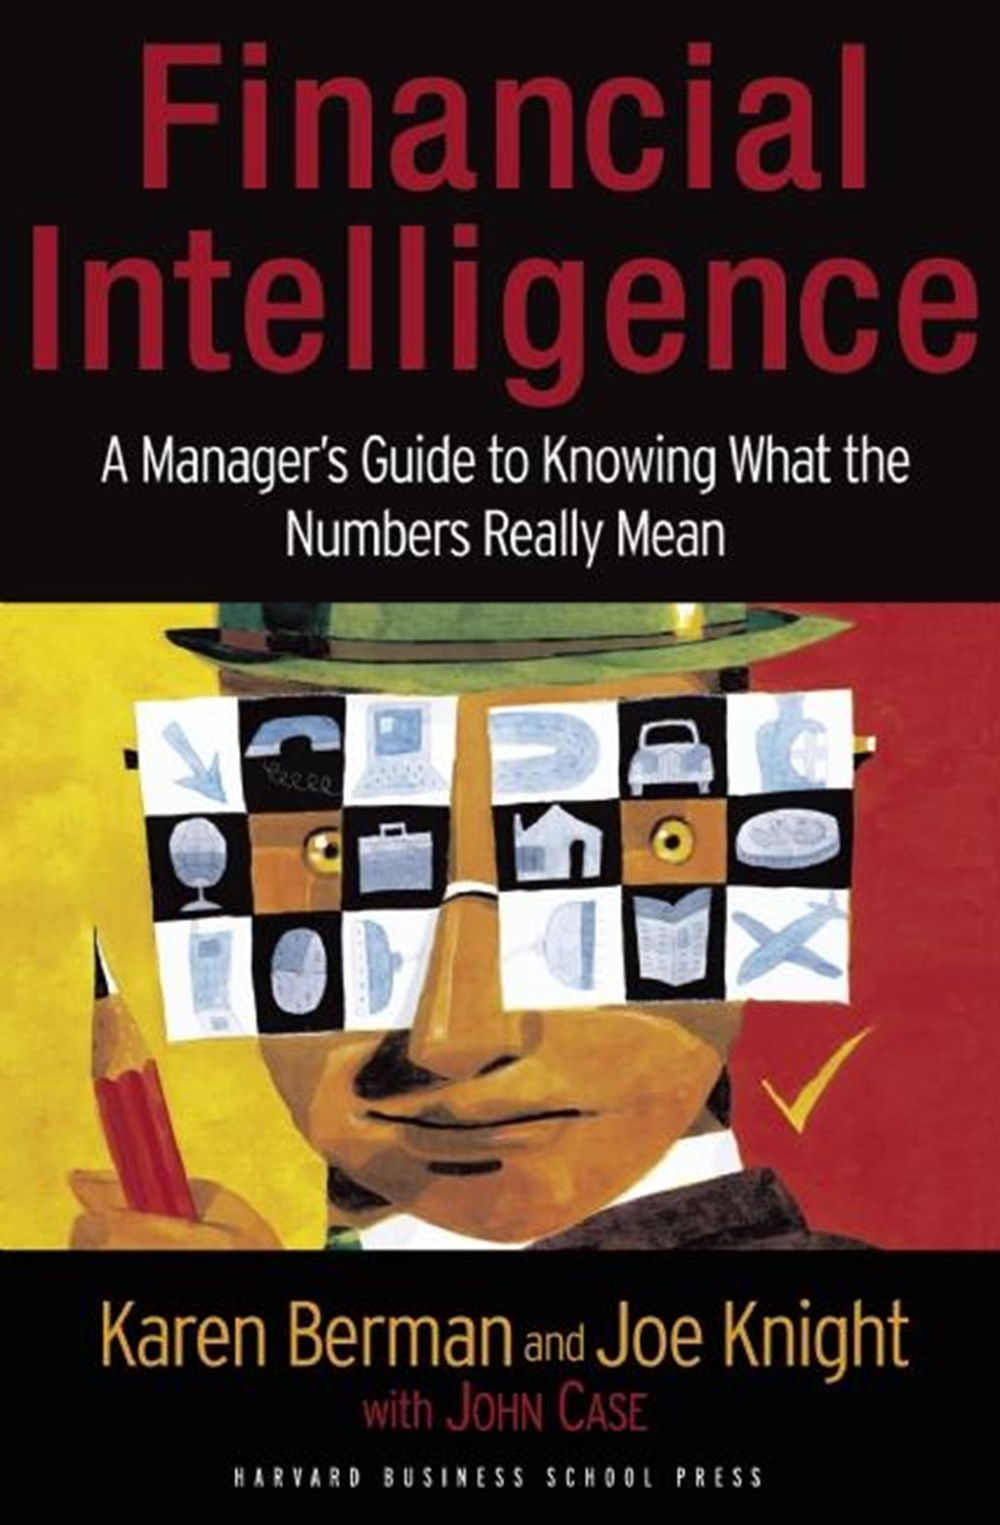 Financial Intelligence: A Manager's Guide to Knowing What the Numbers Really Mean (Revised)